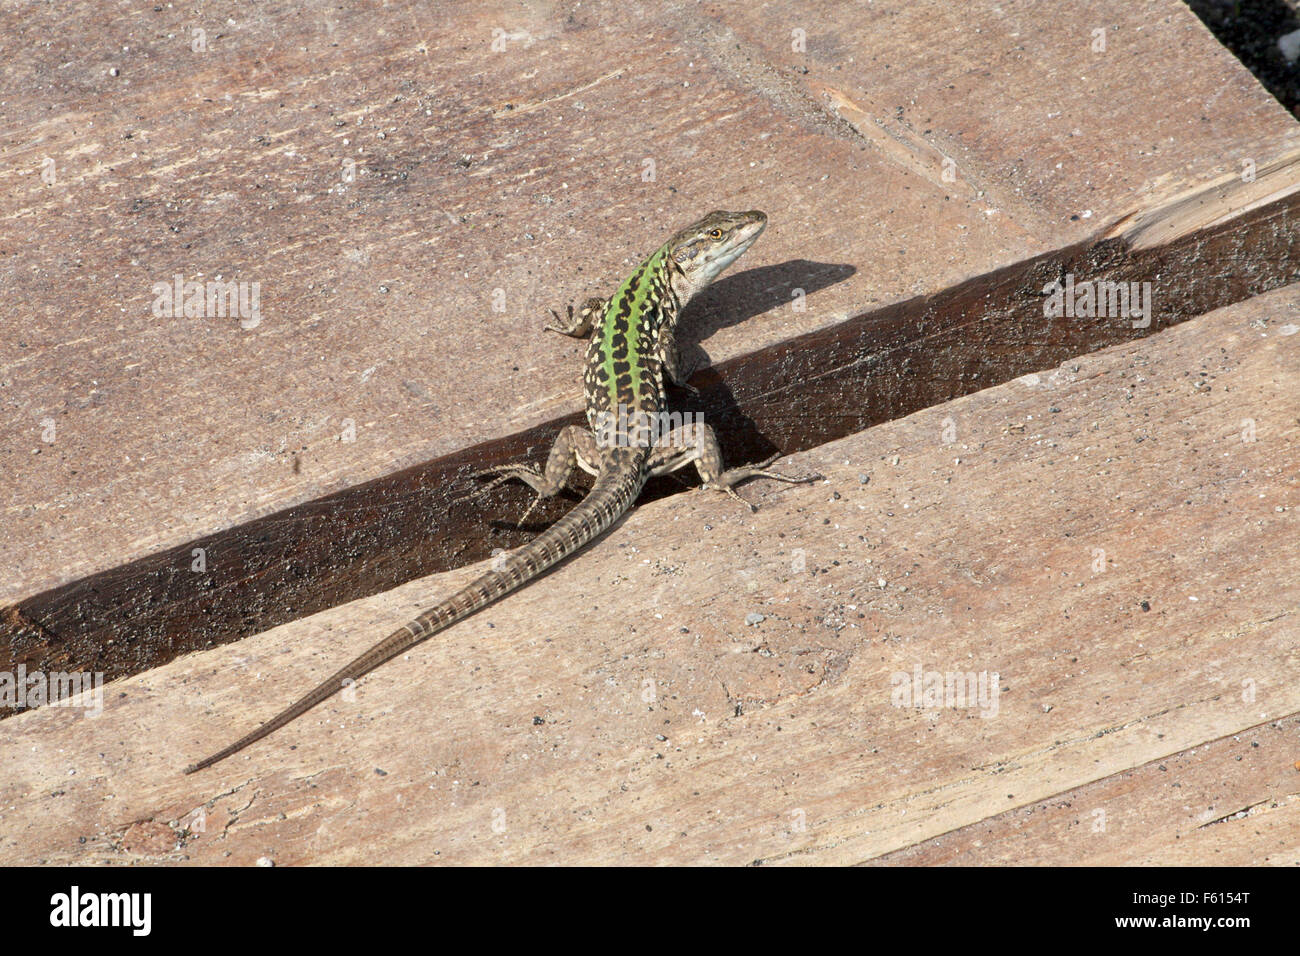 Lizard on wooden planks watching back Stock Photo